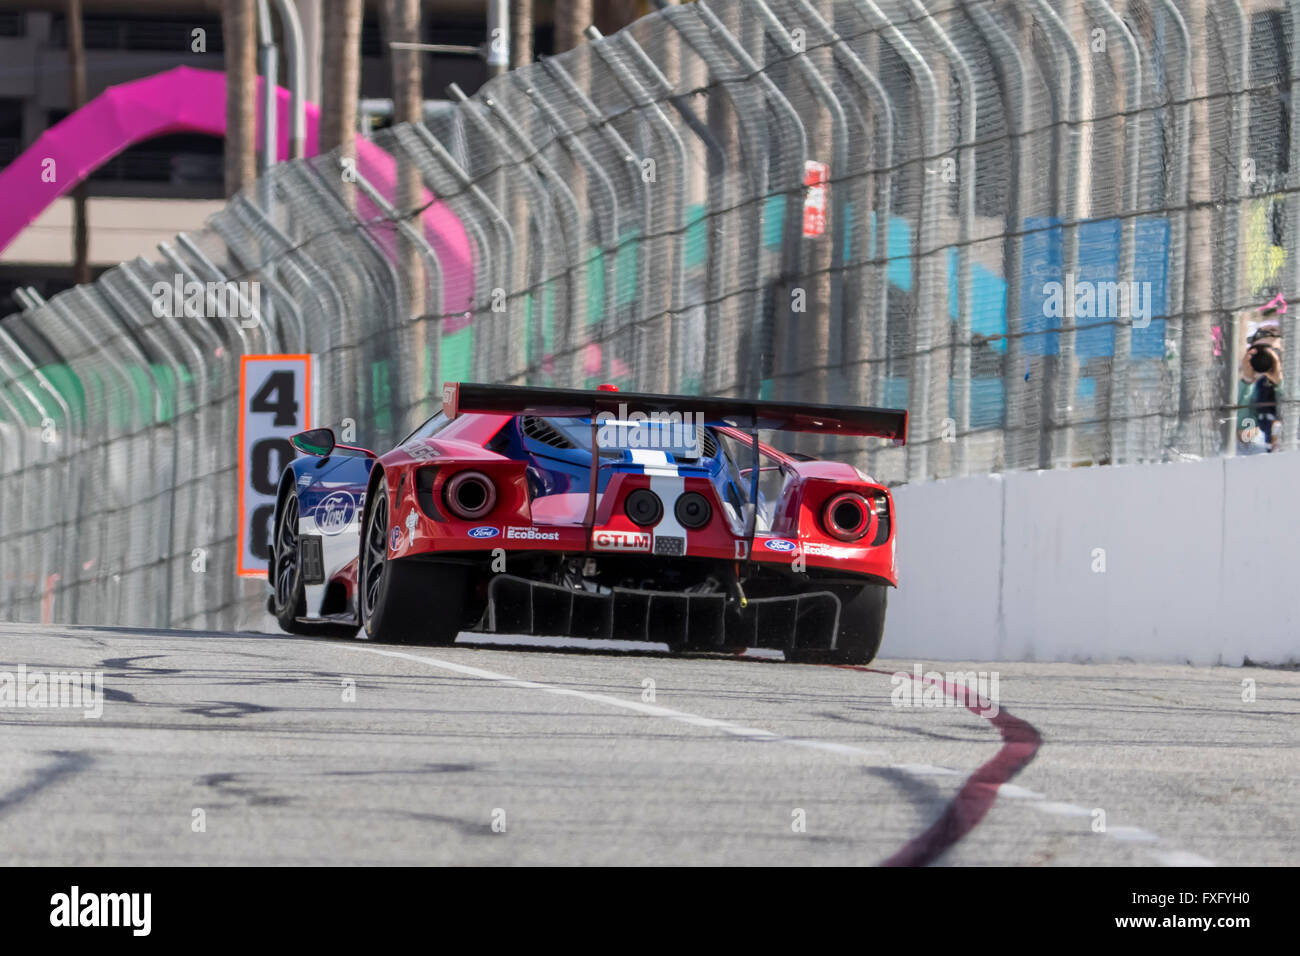 Long Beach, CA, USA. 15th Apr, 2016. Long Beach, CA - Apr 15, 2016: The Chip Ganassi Racing Ford GT races through the turns at the Toyota Grand Prix of Long Beach at Streets of Long Beach in Long Beach, CA. Credit:  csm/Alamy Live News Stock Photo